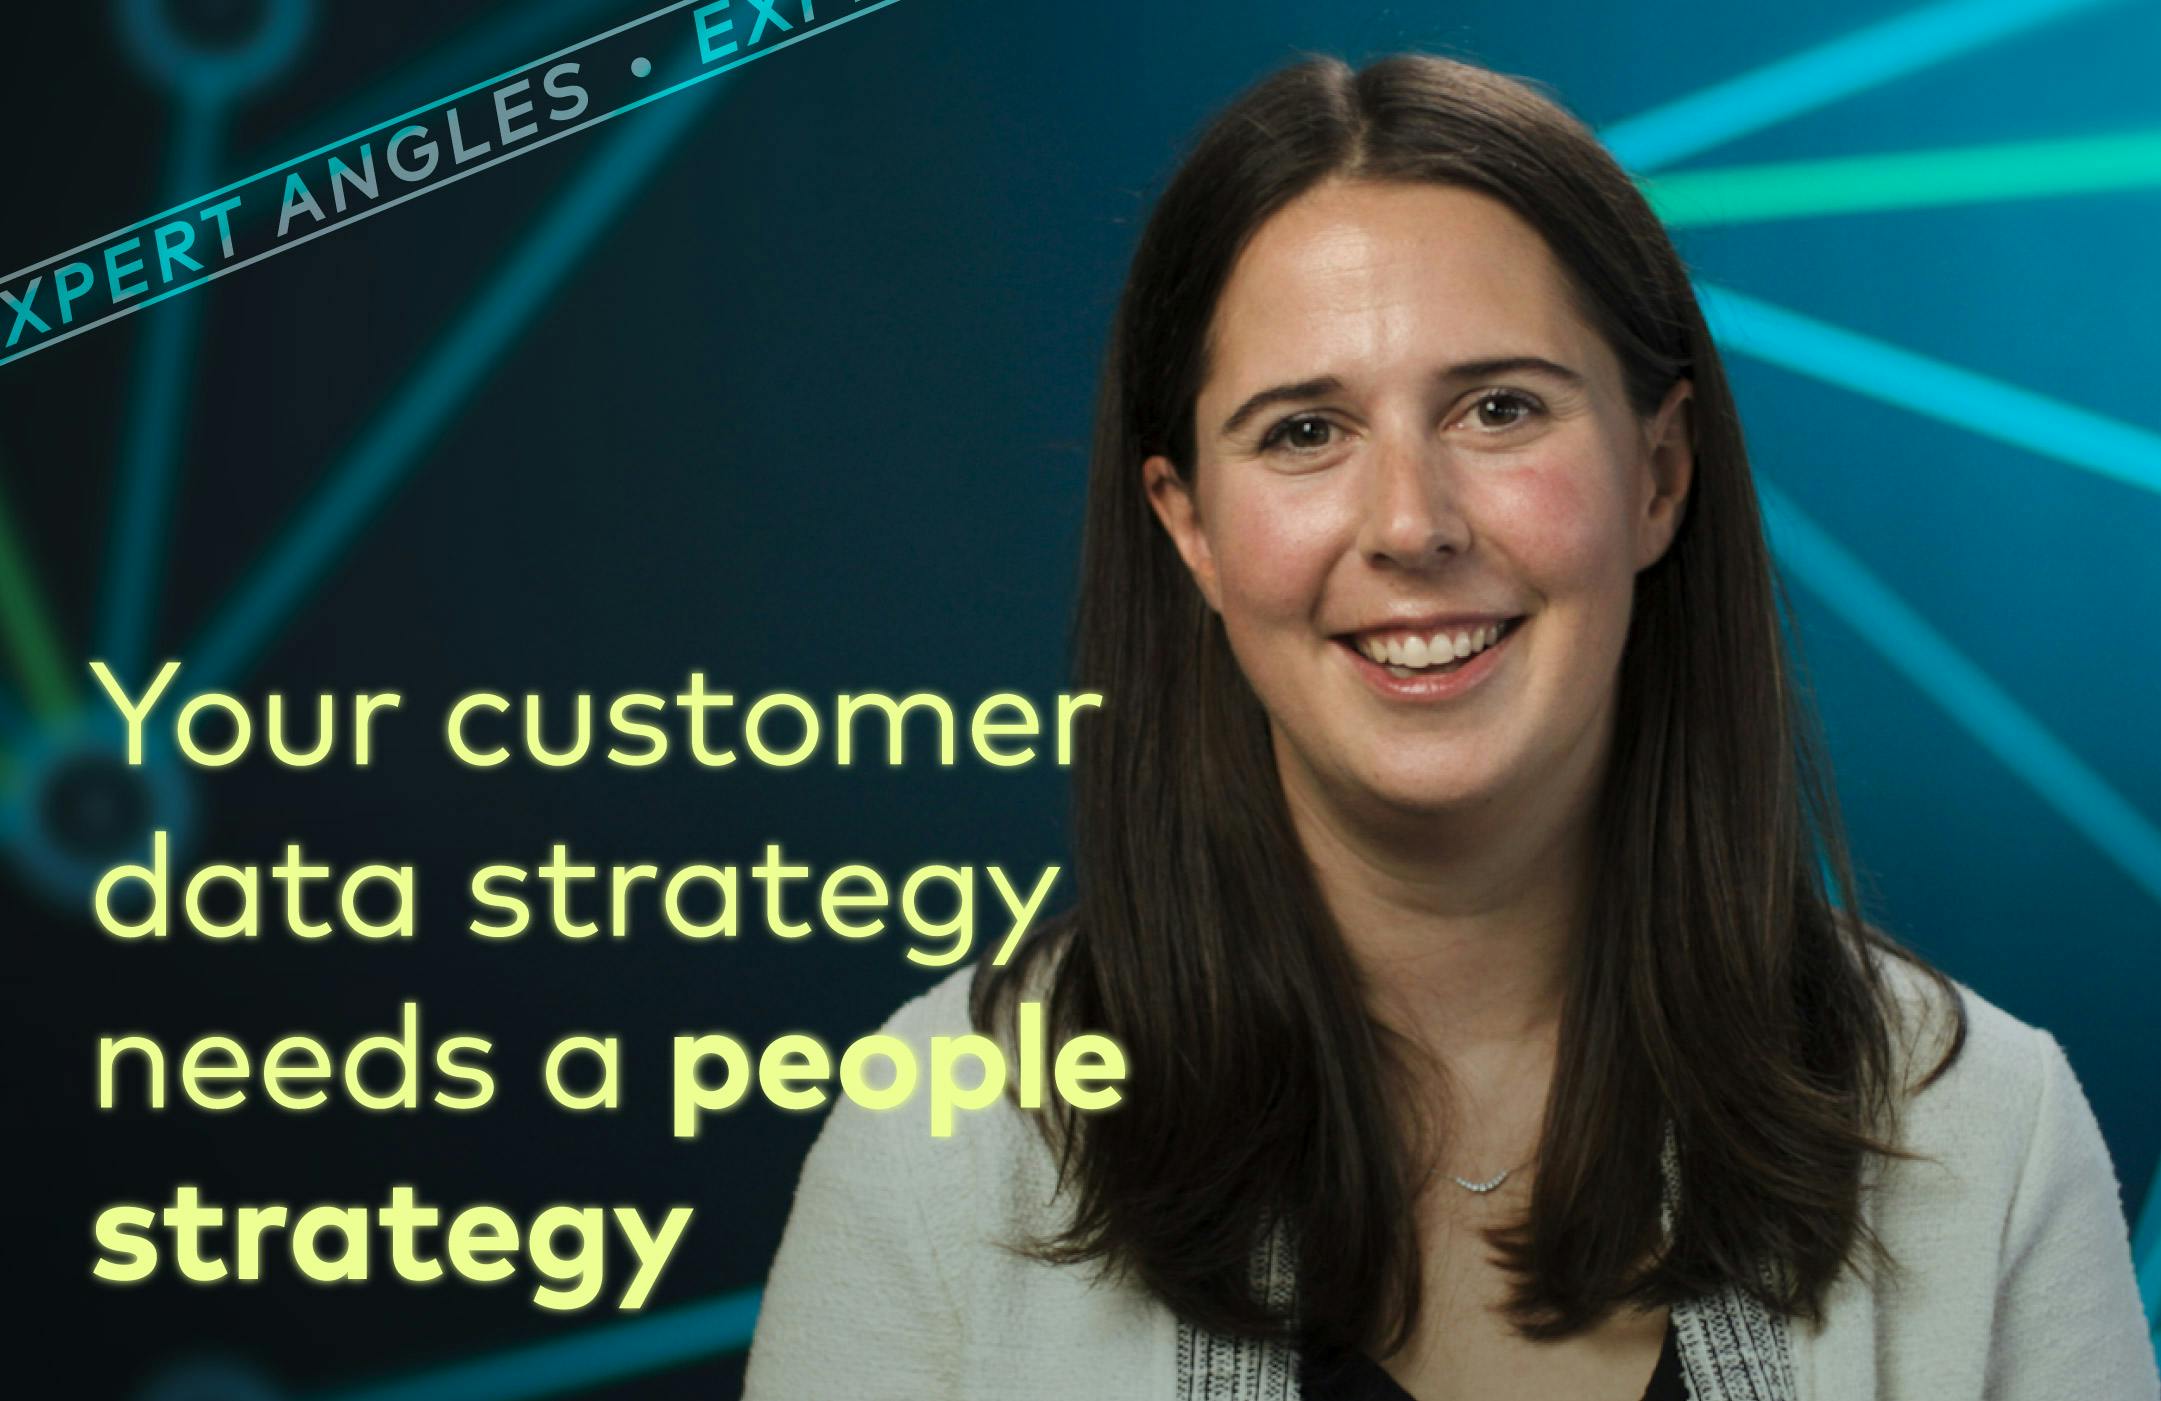 Your customer data strategy needs a people strategy